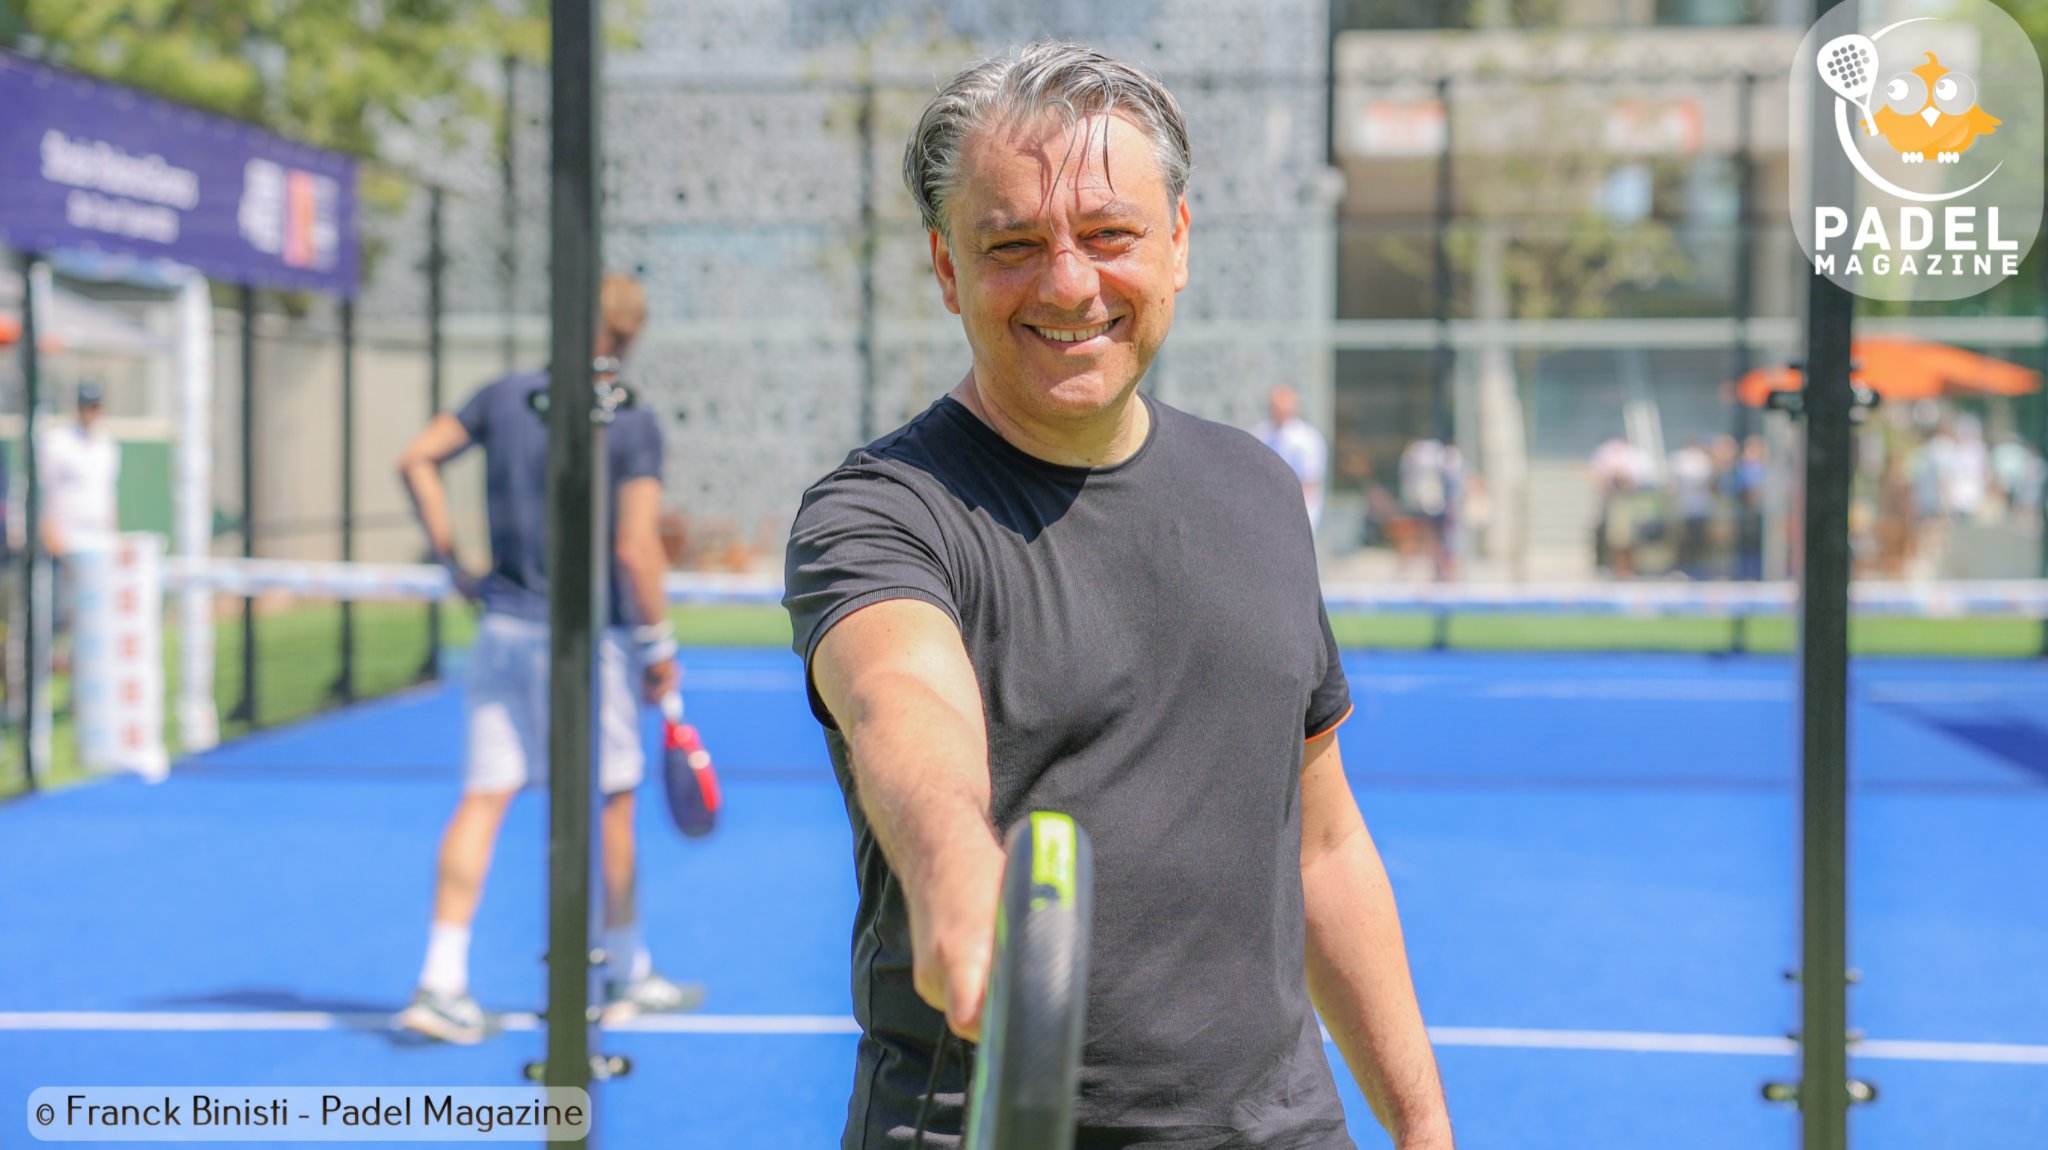 Luca De Meo, the little-known spark between Canal + and the World Padel Tour